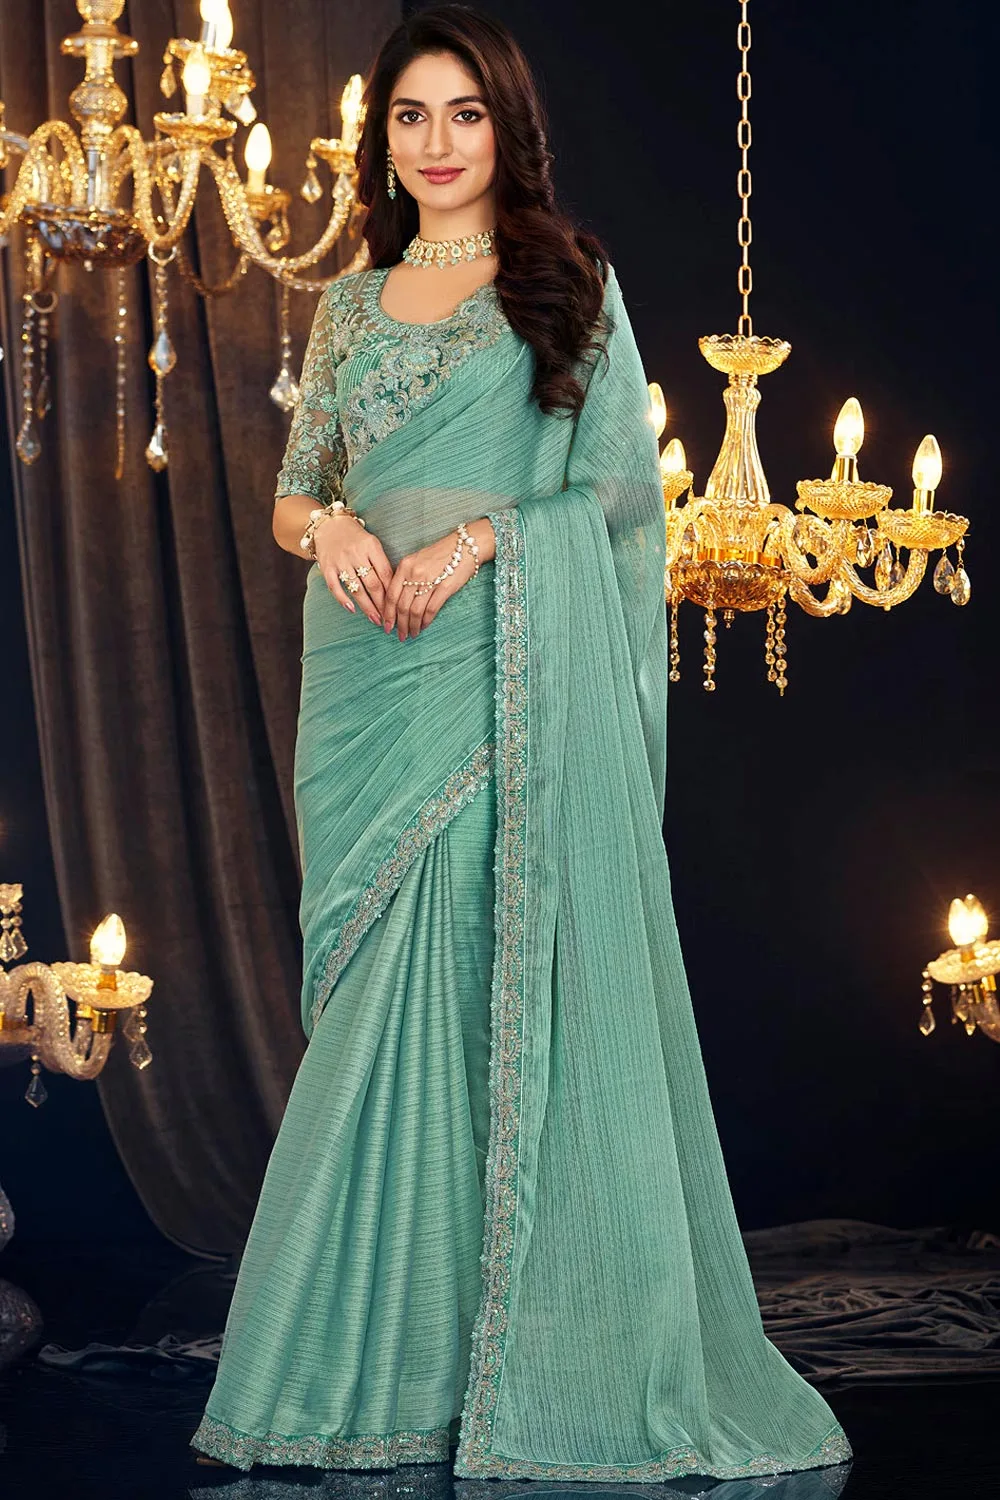 Dazzling Dusty Green Zari Shimmer Georgette Saree with Embroidered Blouse: Sublime Sophistication